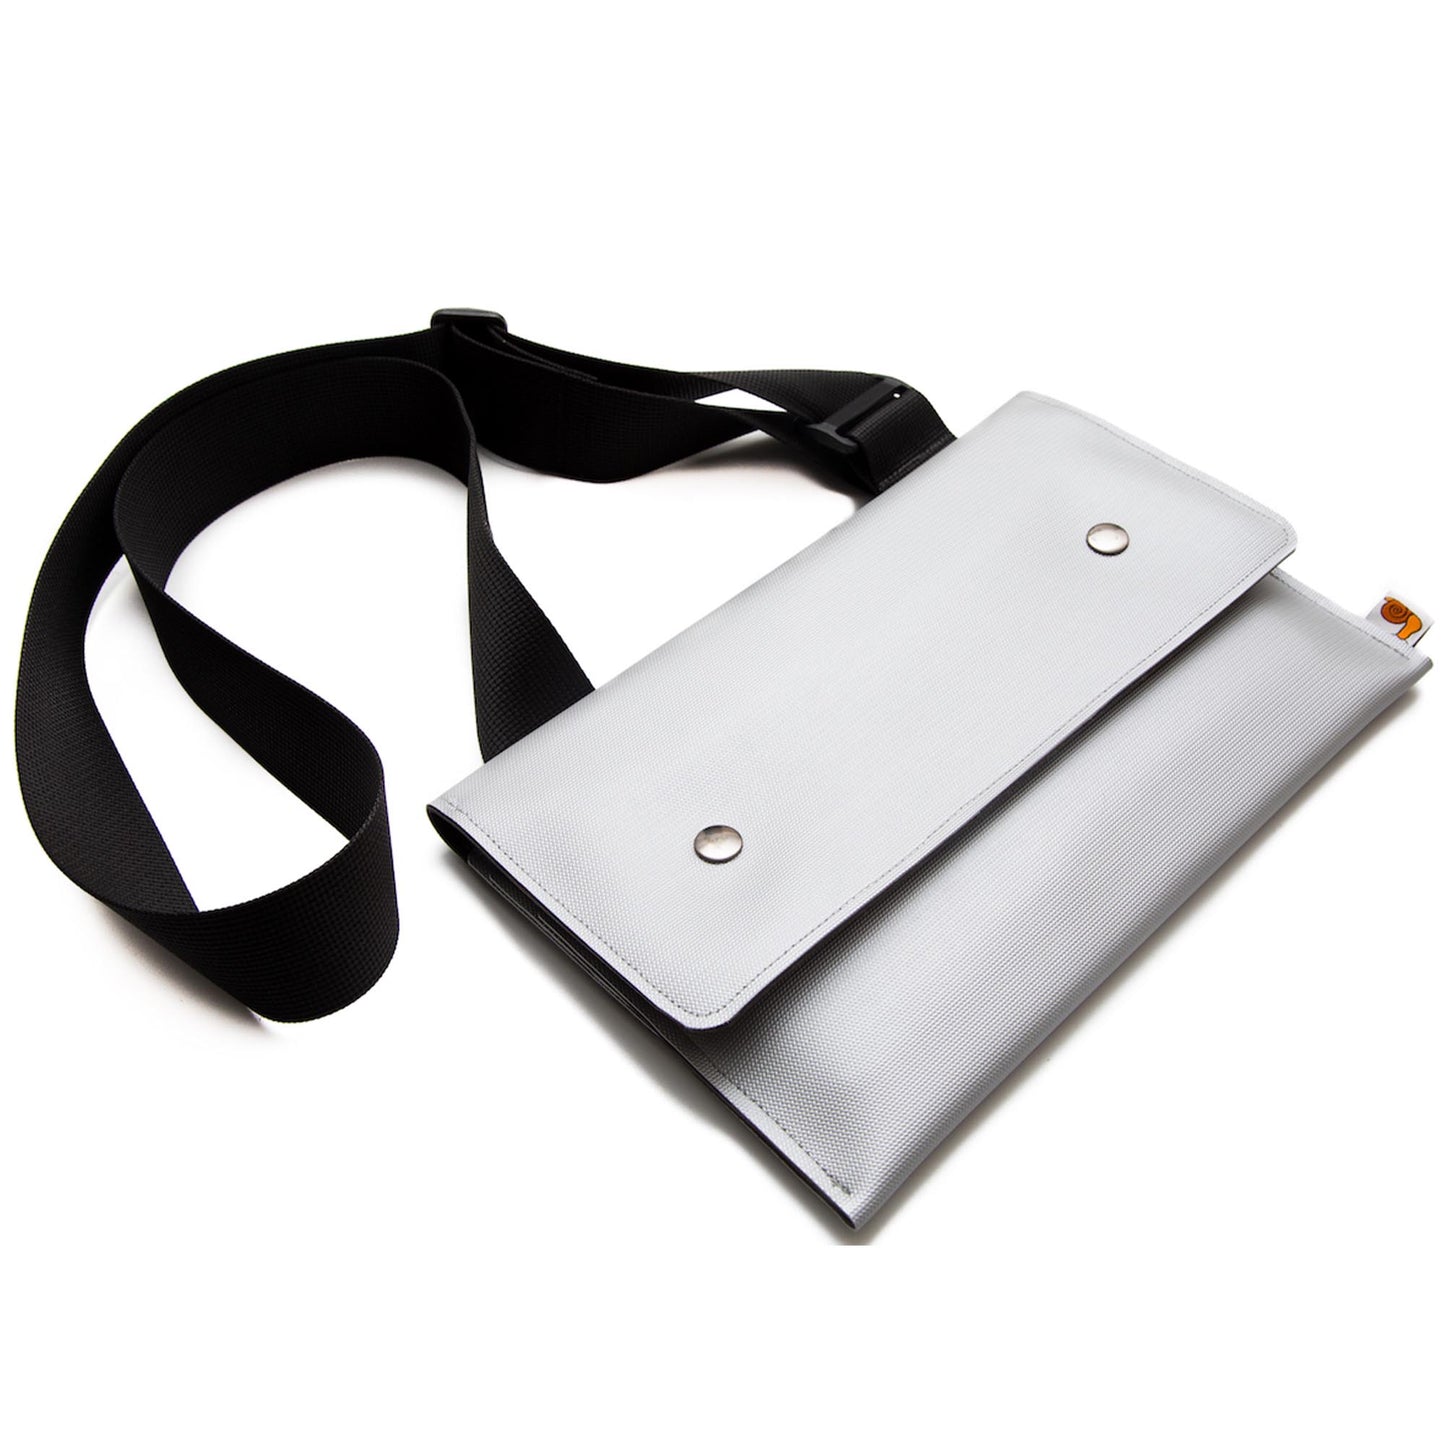 iPad Messenger Bag with Shoulder Strap - Silver Faux Leather